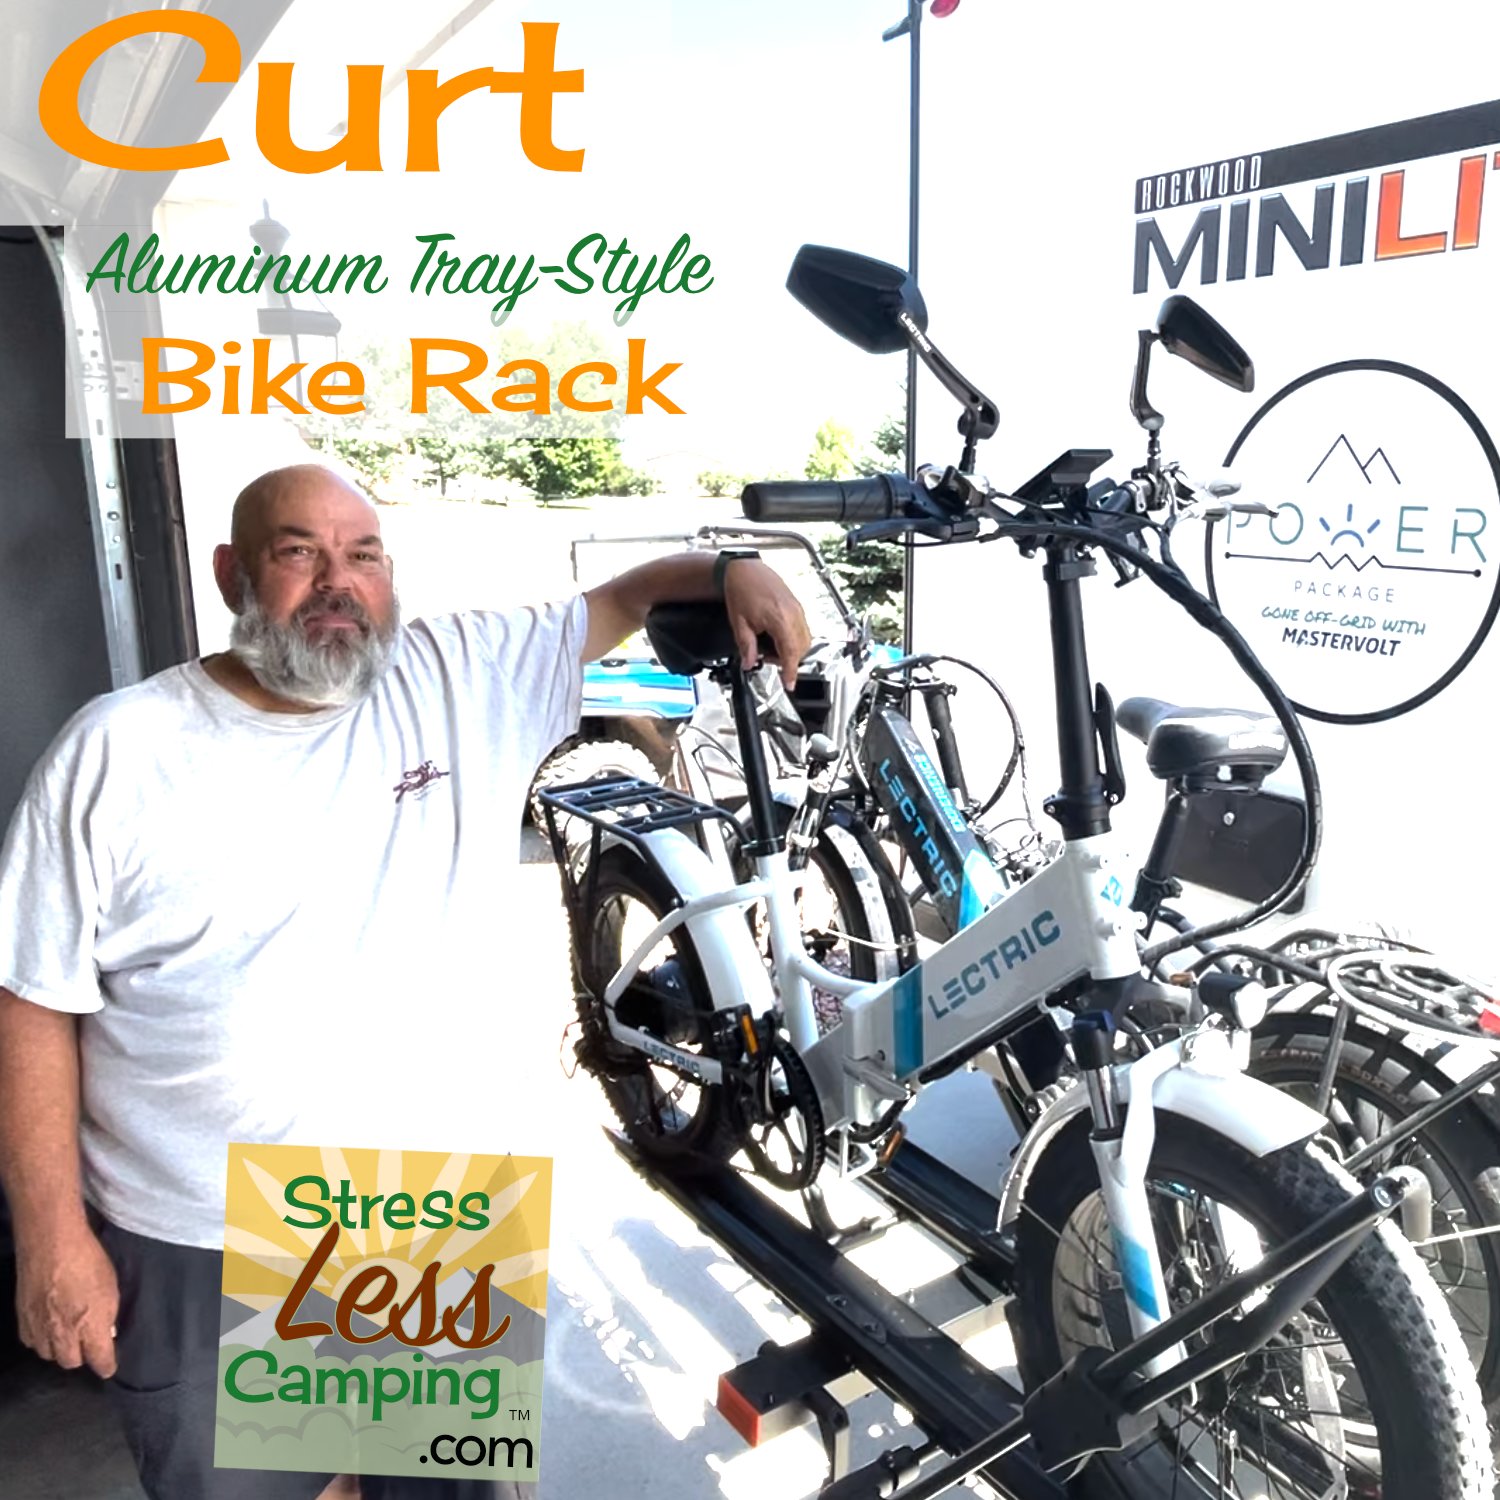 Curt Tray-Style Aluminum bike rack review